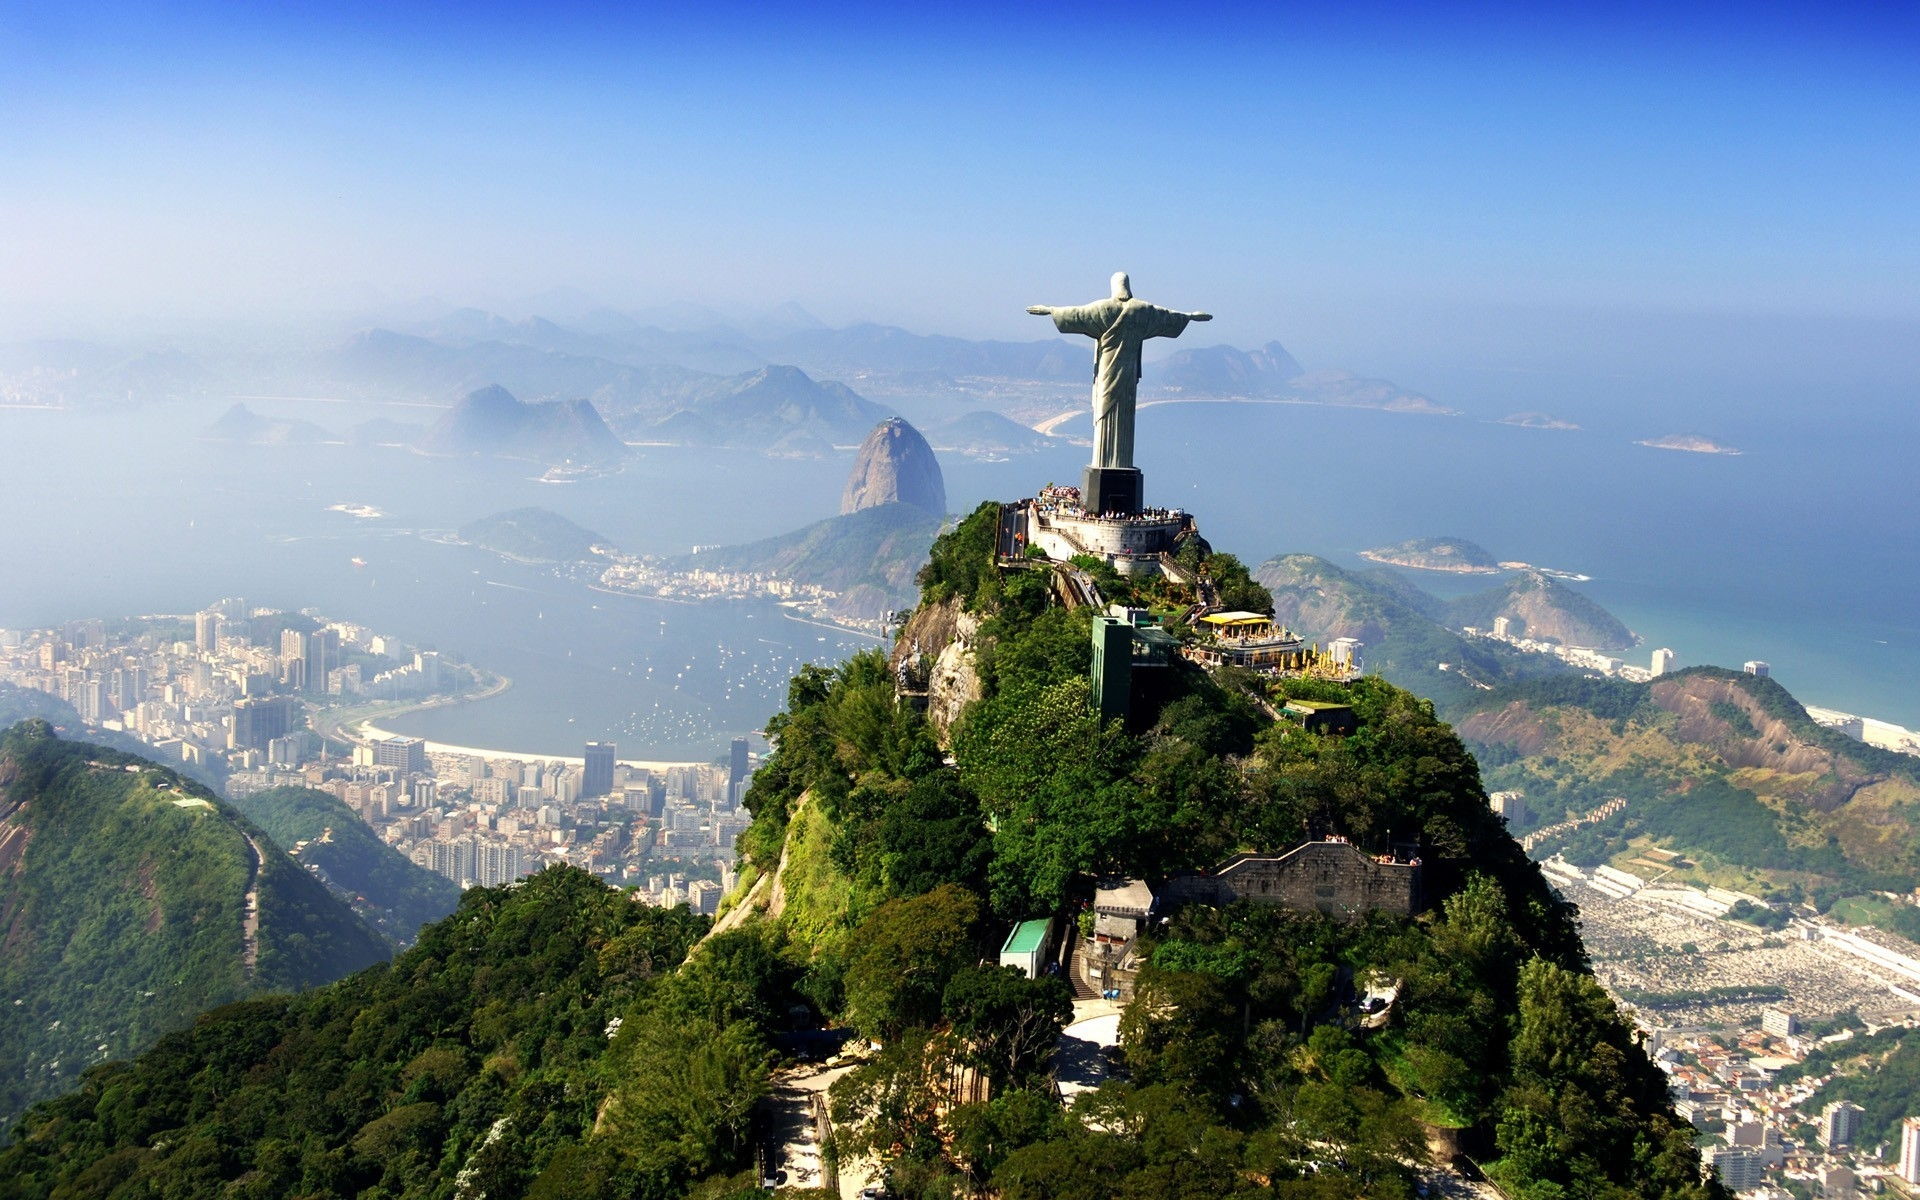 jesus-christ-statue-rio-de-janeiro-brazil-awesome-desktop-background-images- of-cities-free-download | Innovation Forum